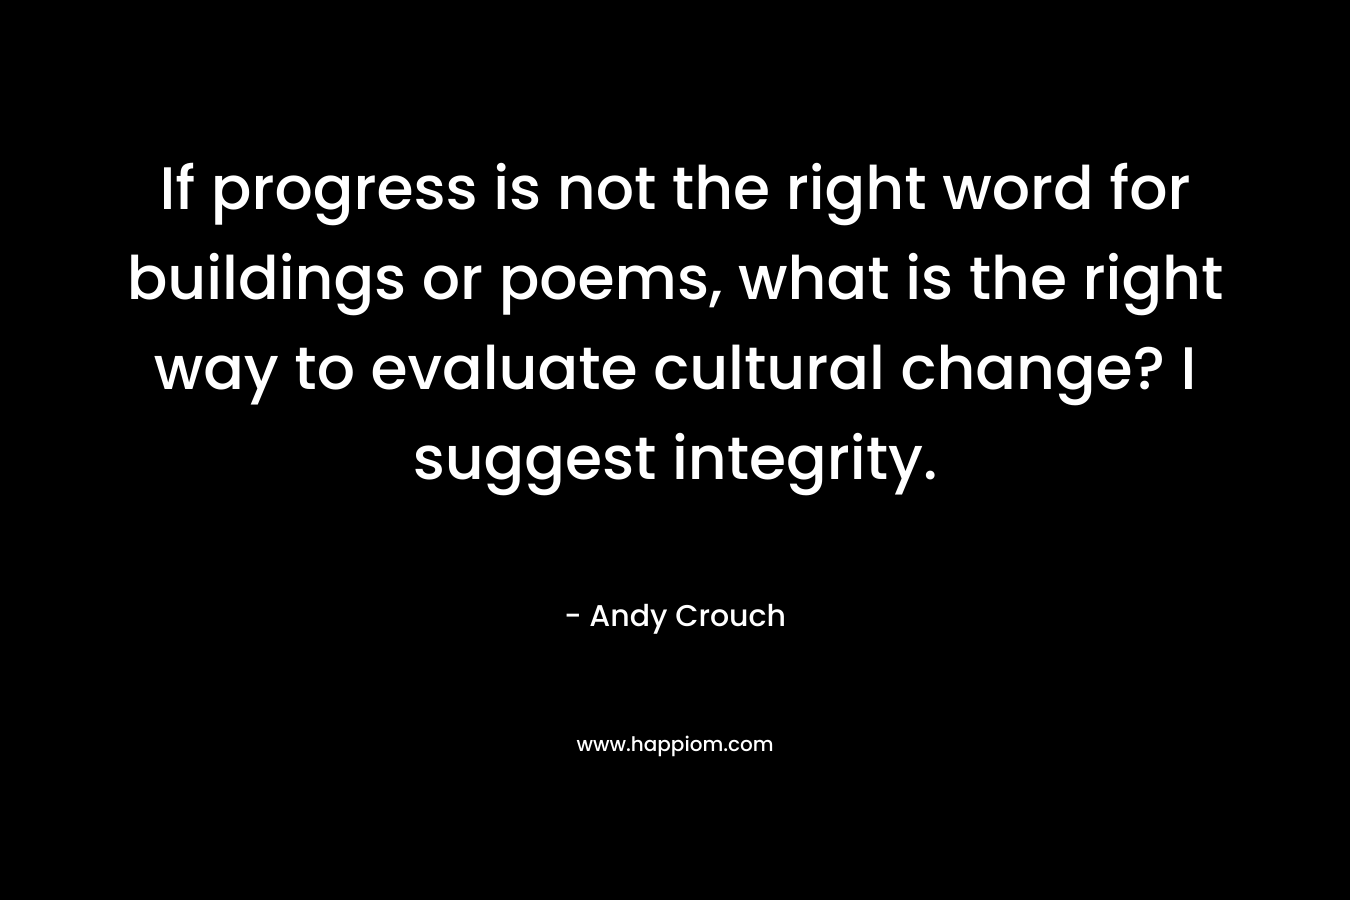 If progress is not the right word for buildings or poems, what is the right way to evaluate cultural change? I suggest integrity.